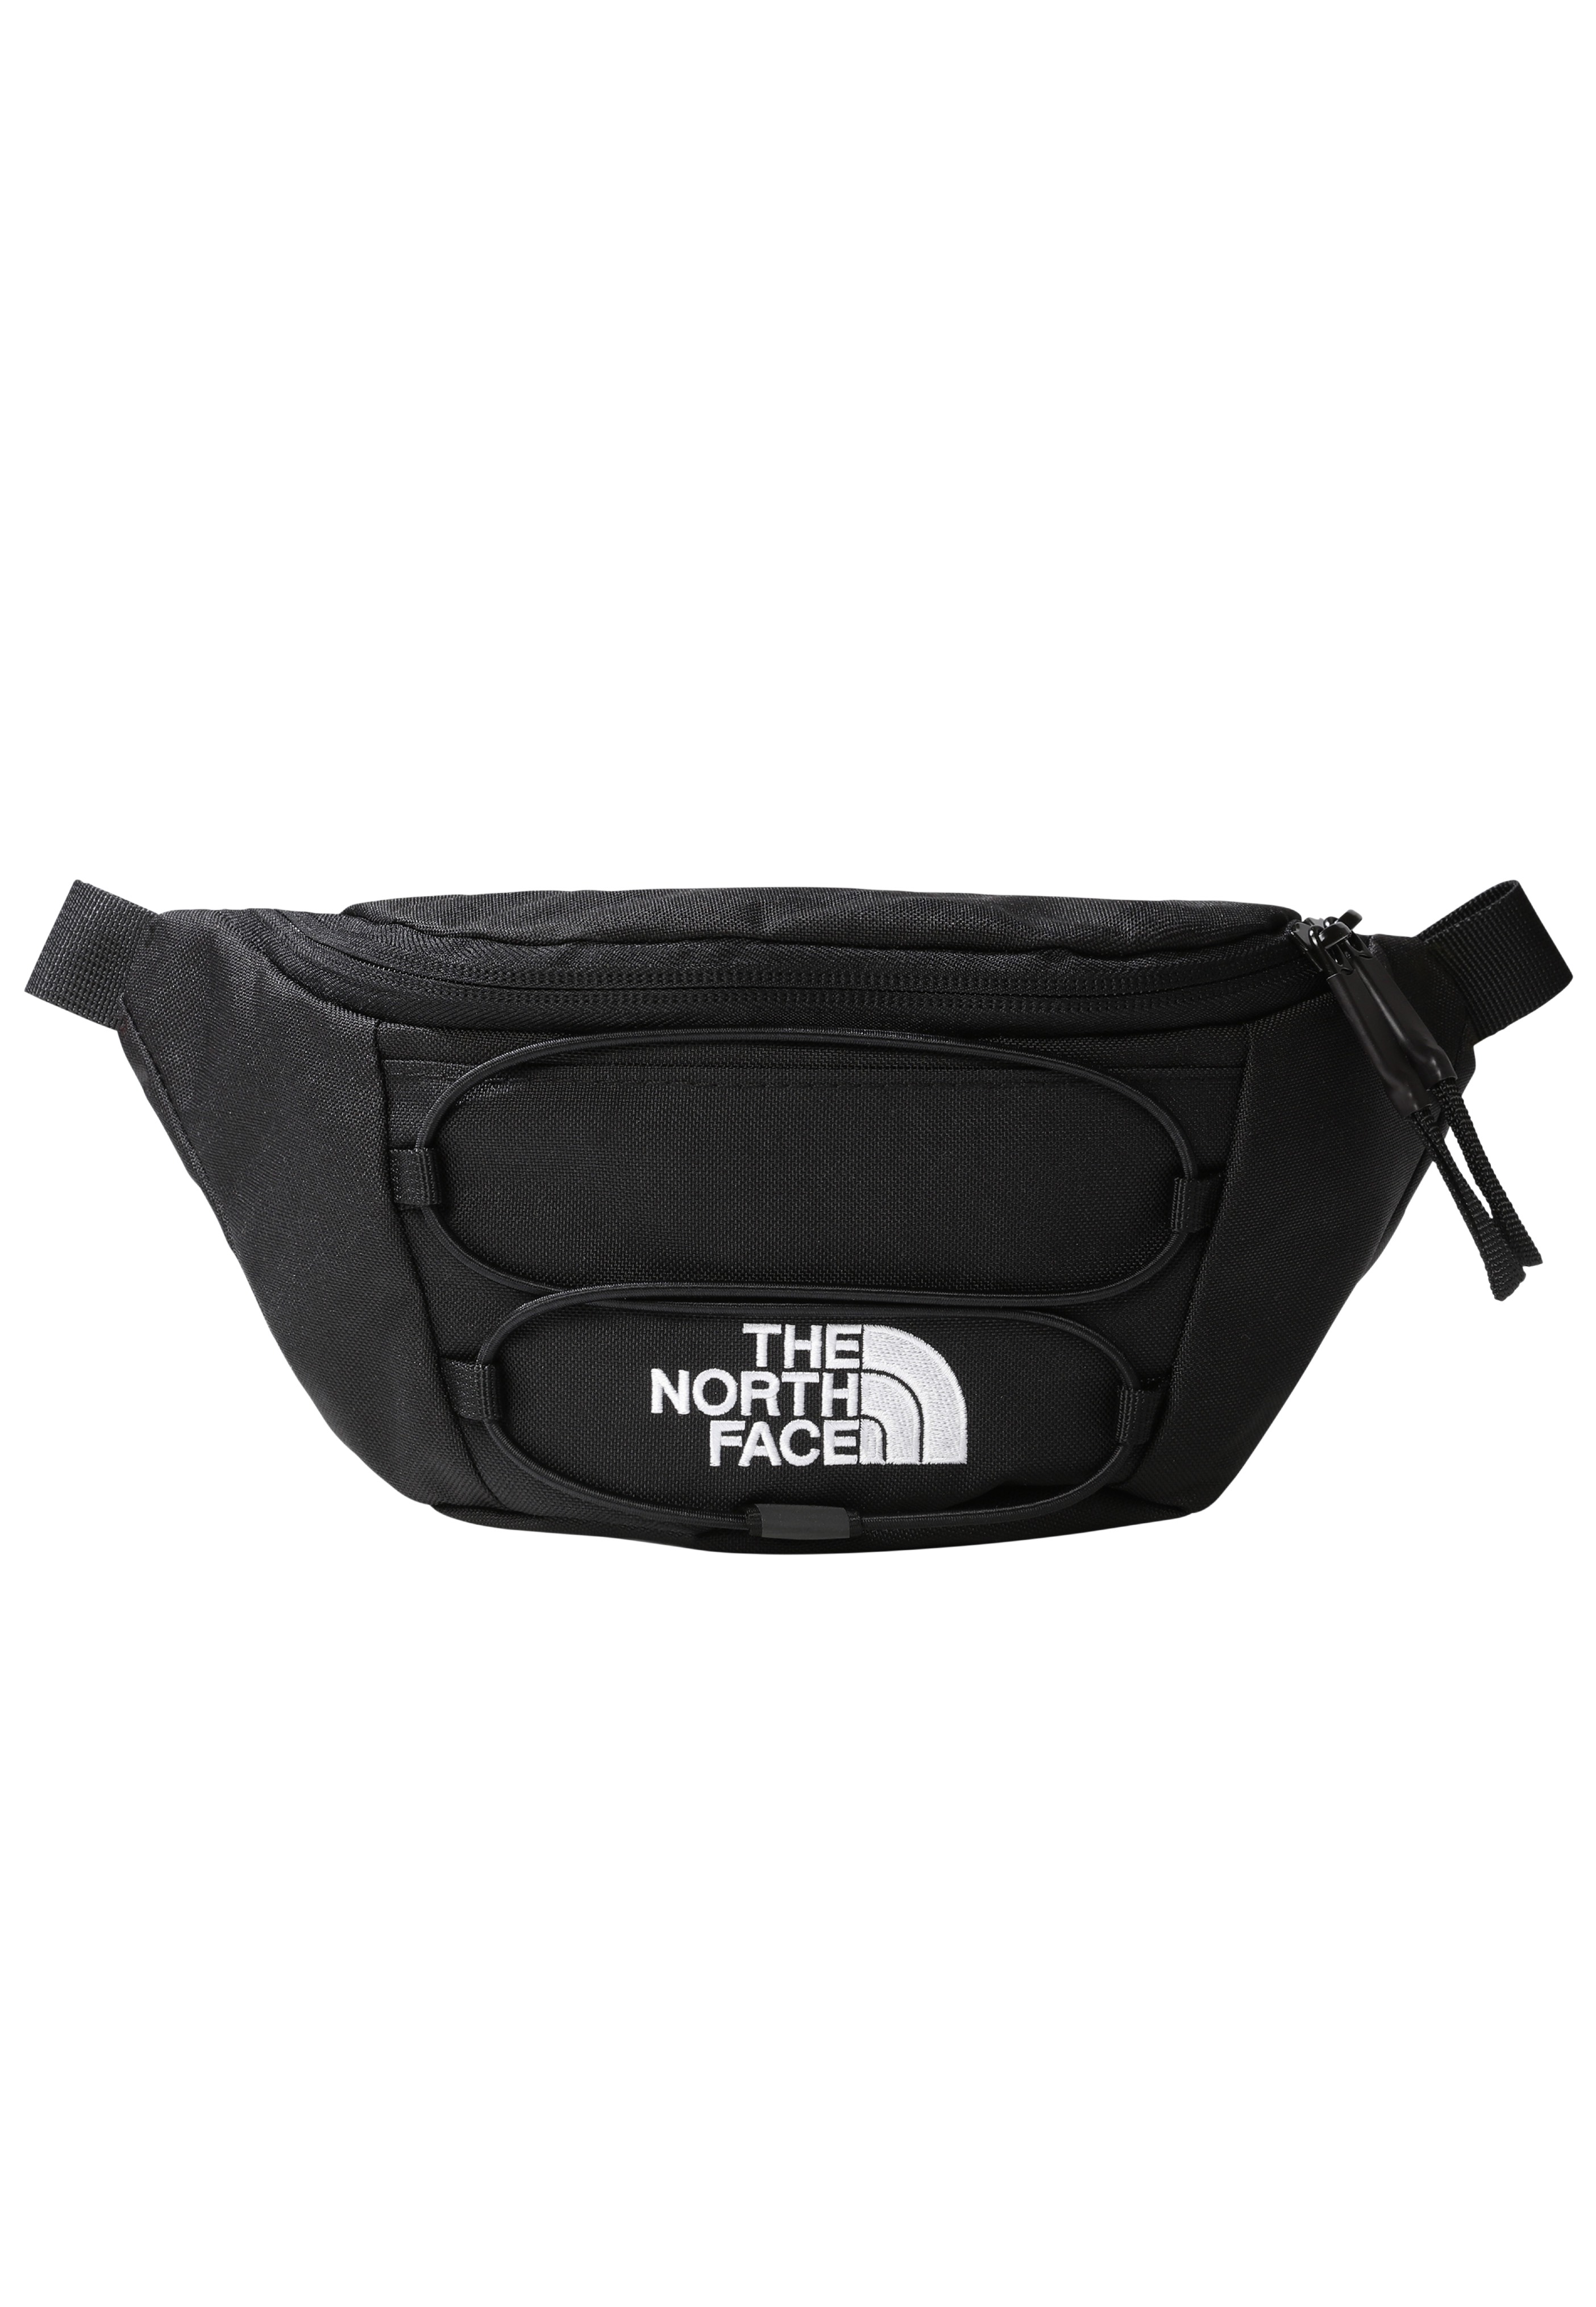 The North Face - Jester Lumbar Tnf Black - Bags